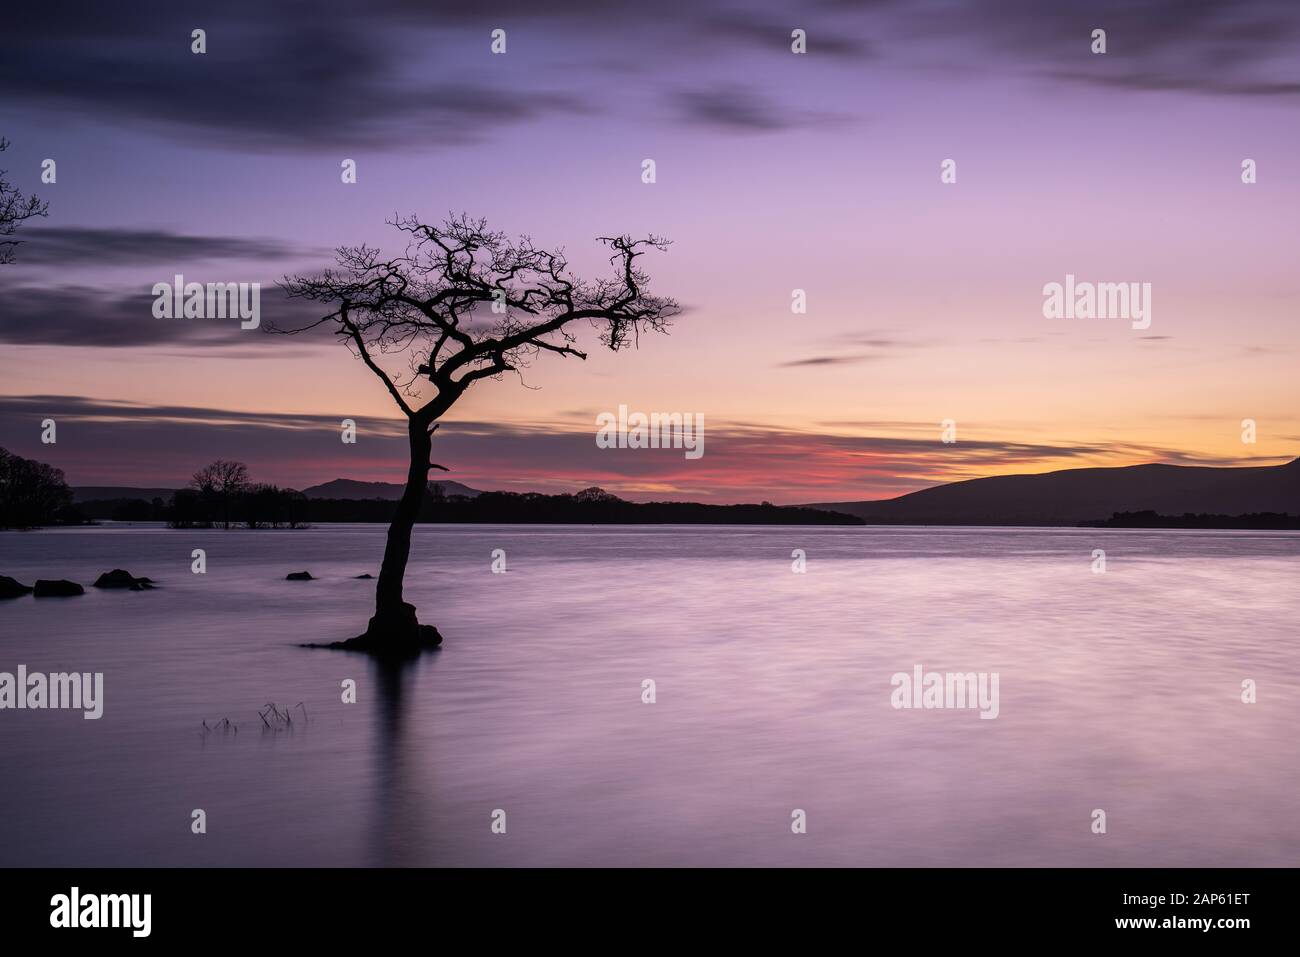 A sunset at the Picturesque Lone Tree at Milarrochy Bay on Loch Lomond, near the village of Balmaha, Scotland. Stock Photo